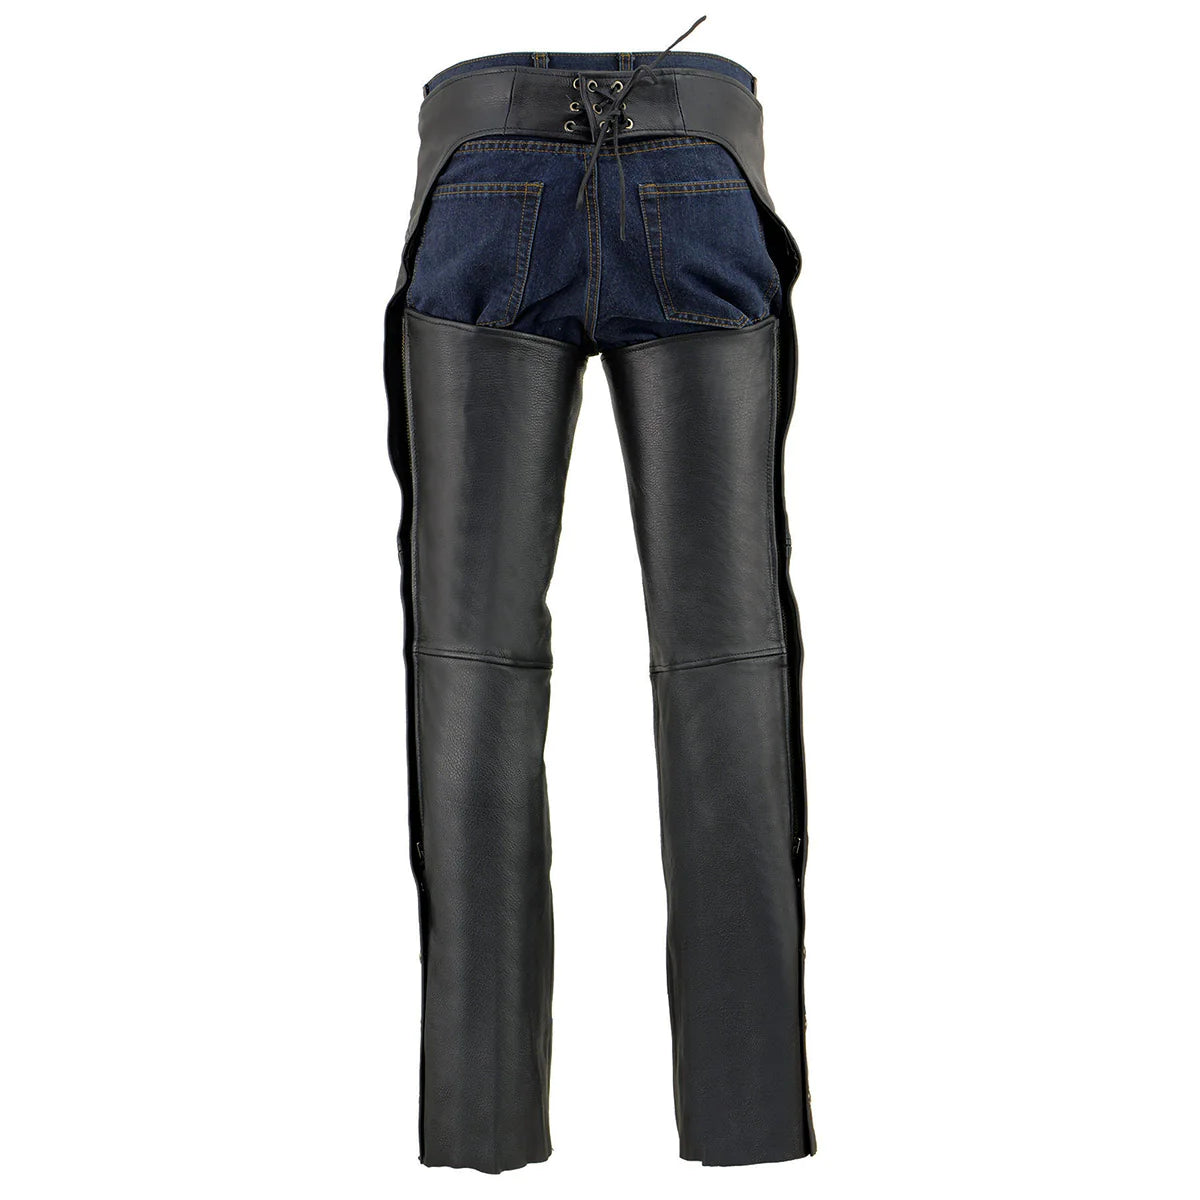 Men's Black 'Cool-Tec' Motorcycle Leather Chaps with Zippered Thigh Pockets